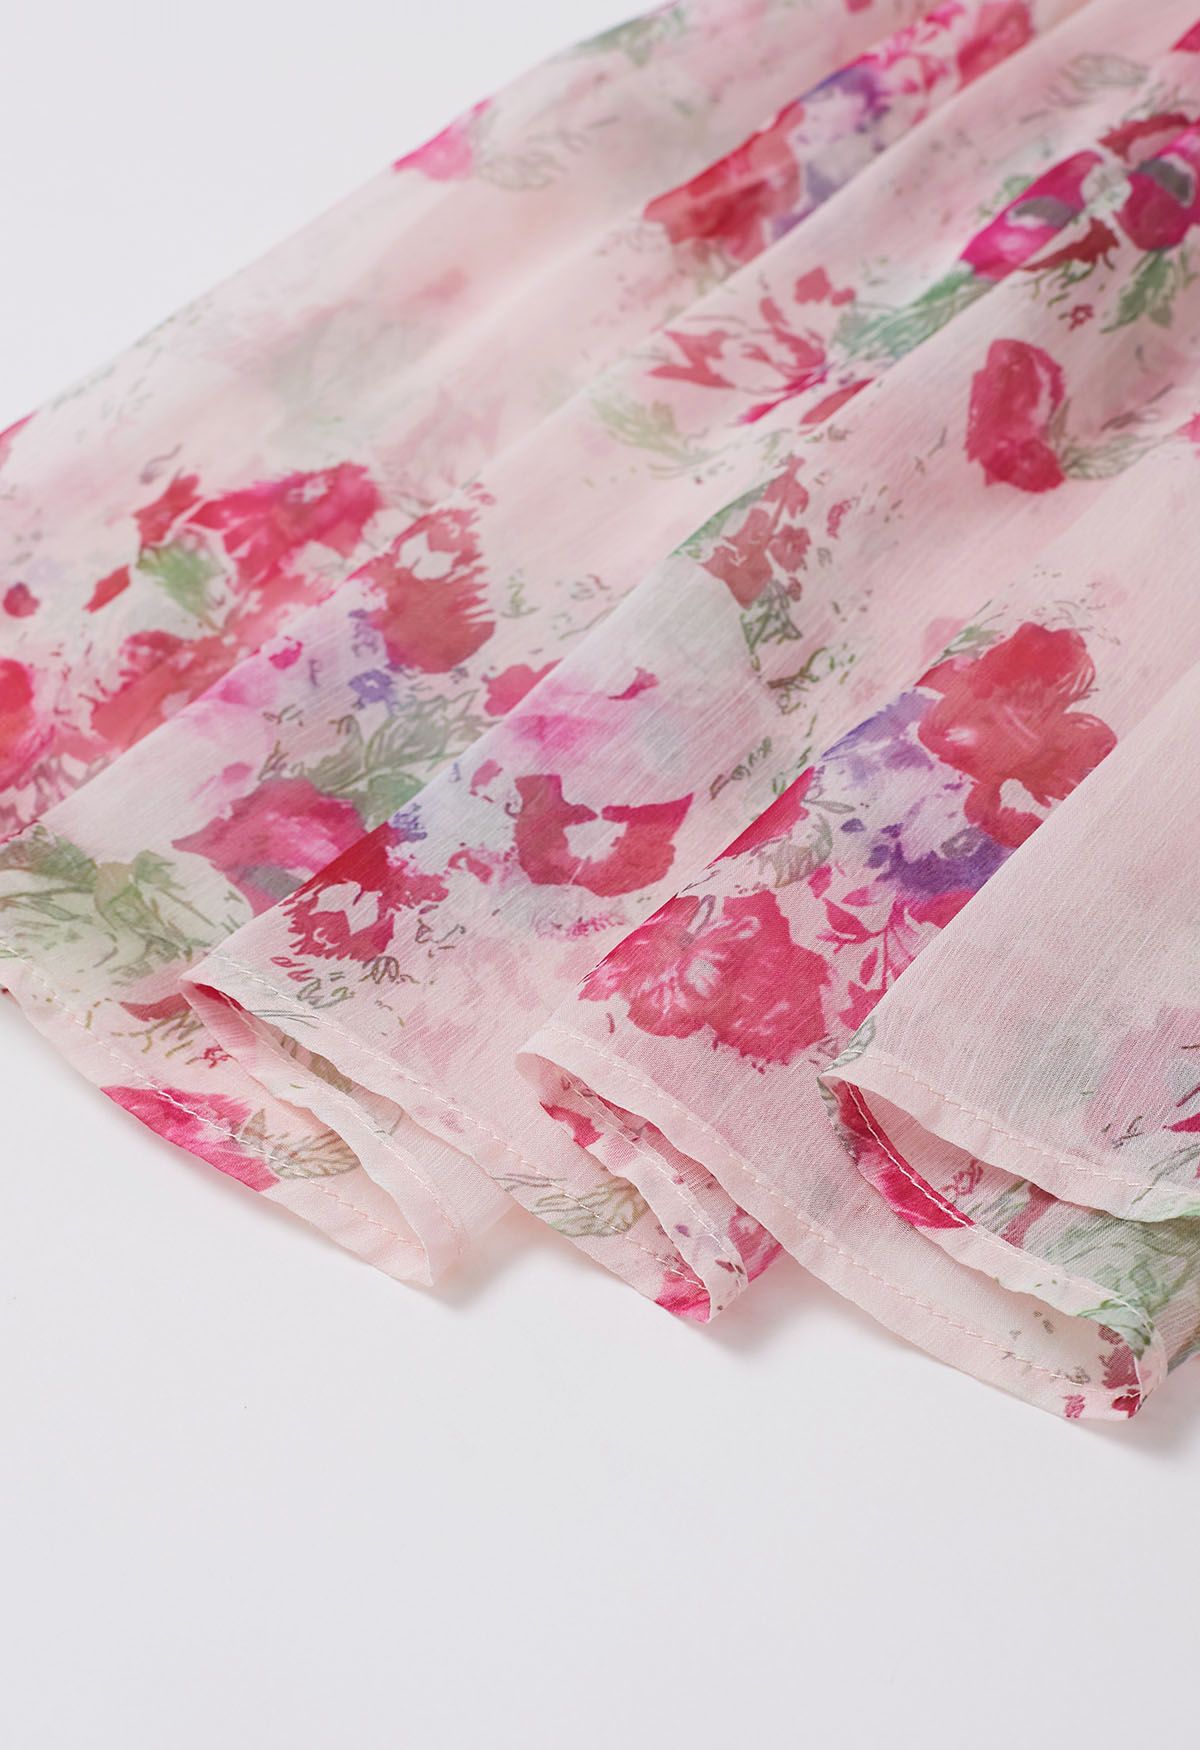 Watercolor Pink Floral Tiered Chiffon Dress